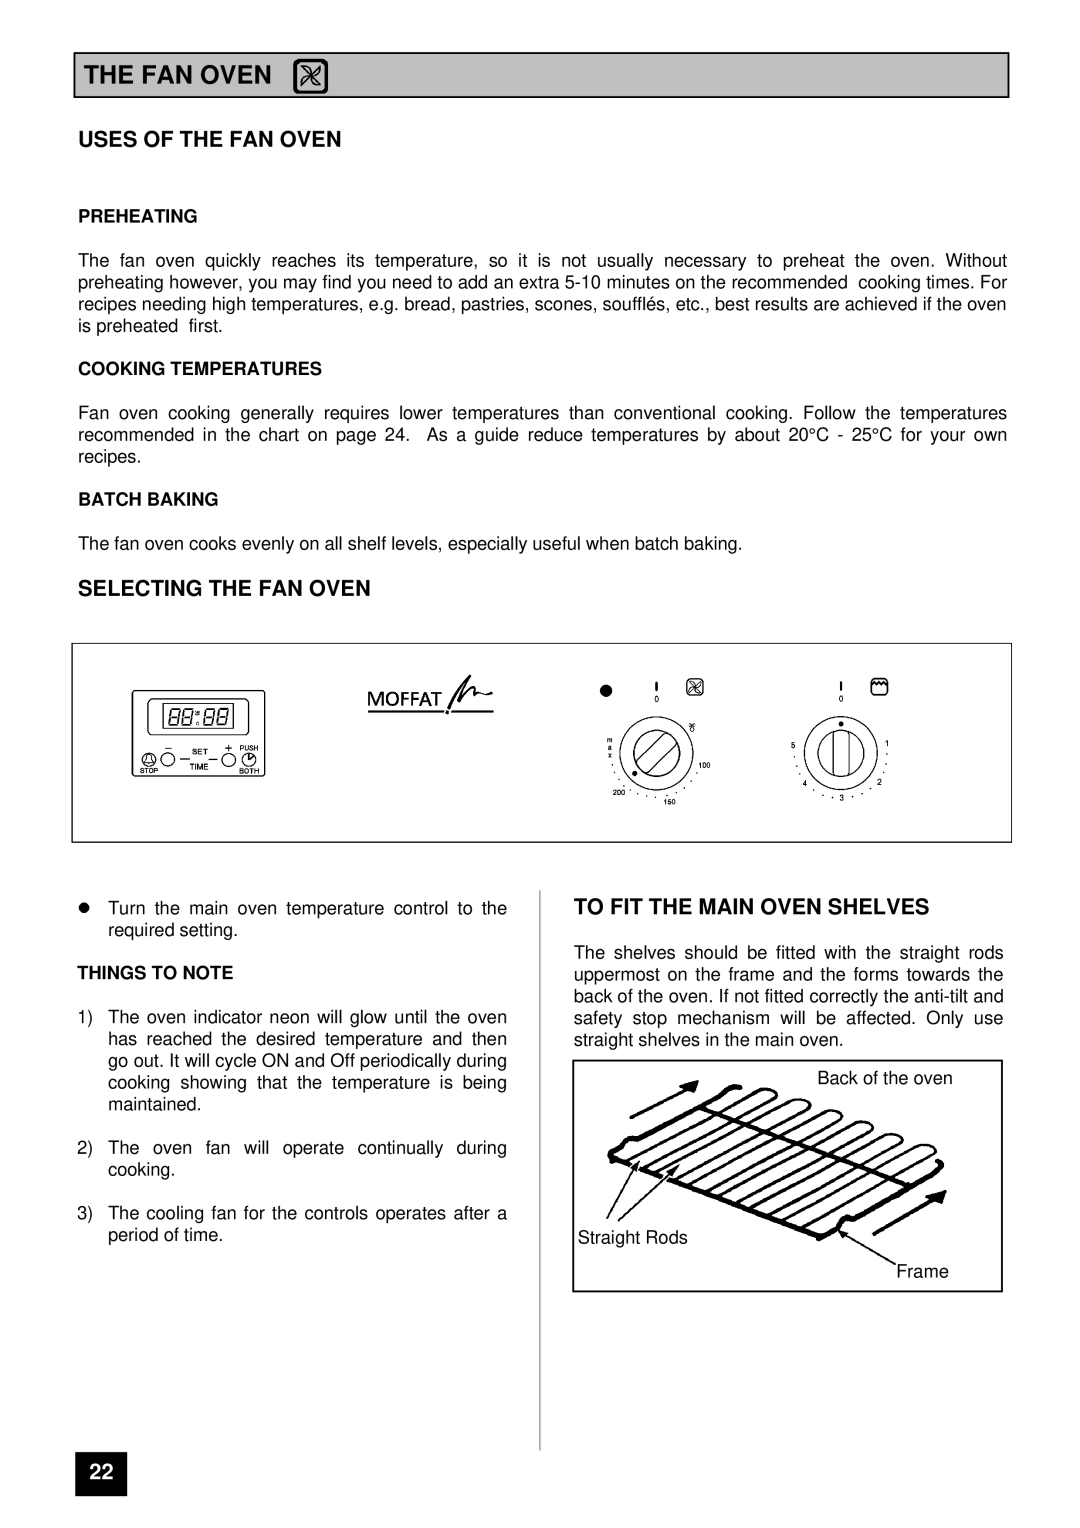 Moffat MD 900 B/W installation instructions Uses of the FAN Oven, Selecting the FAN Oven, To FIT the Main Oven Shelves 